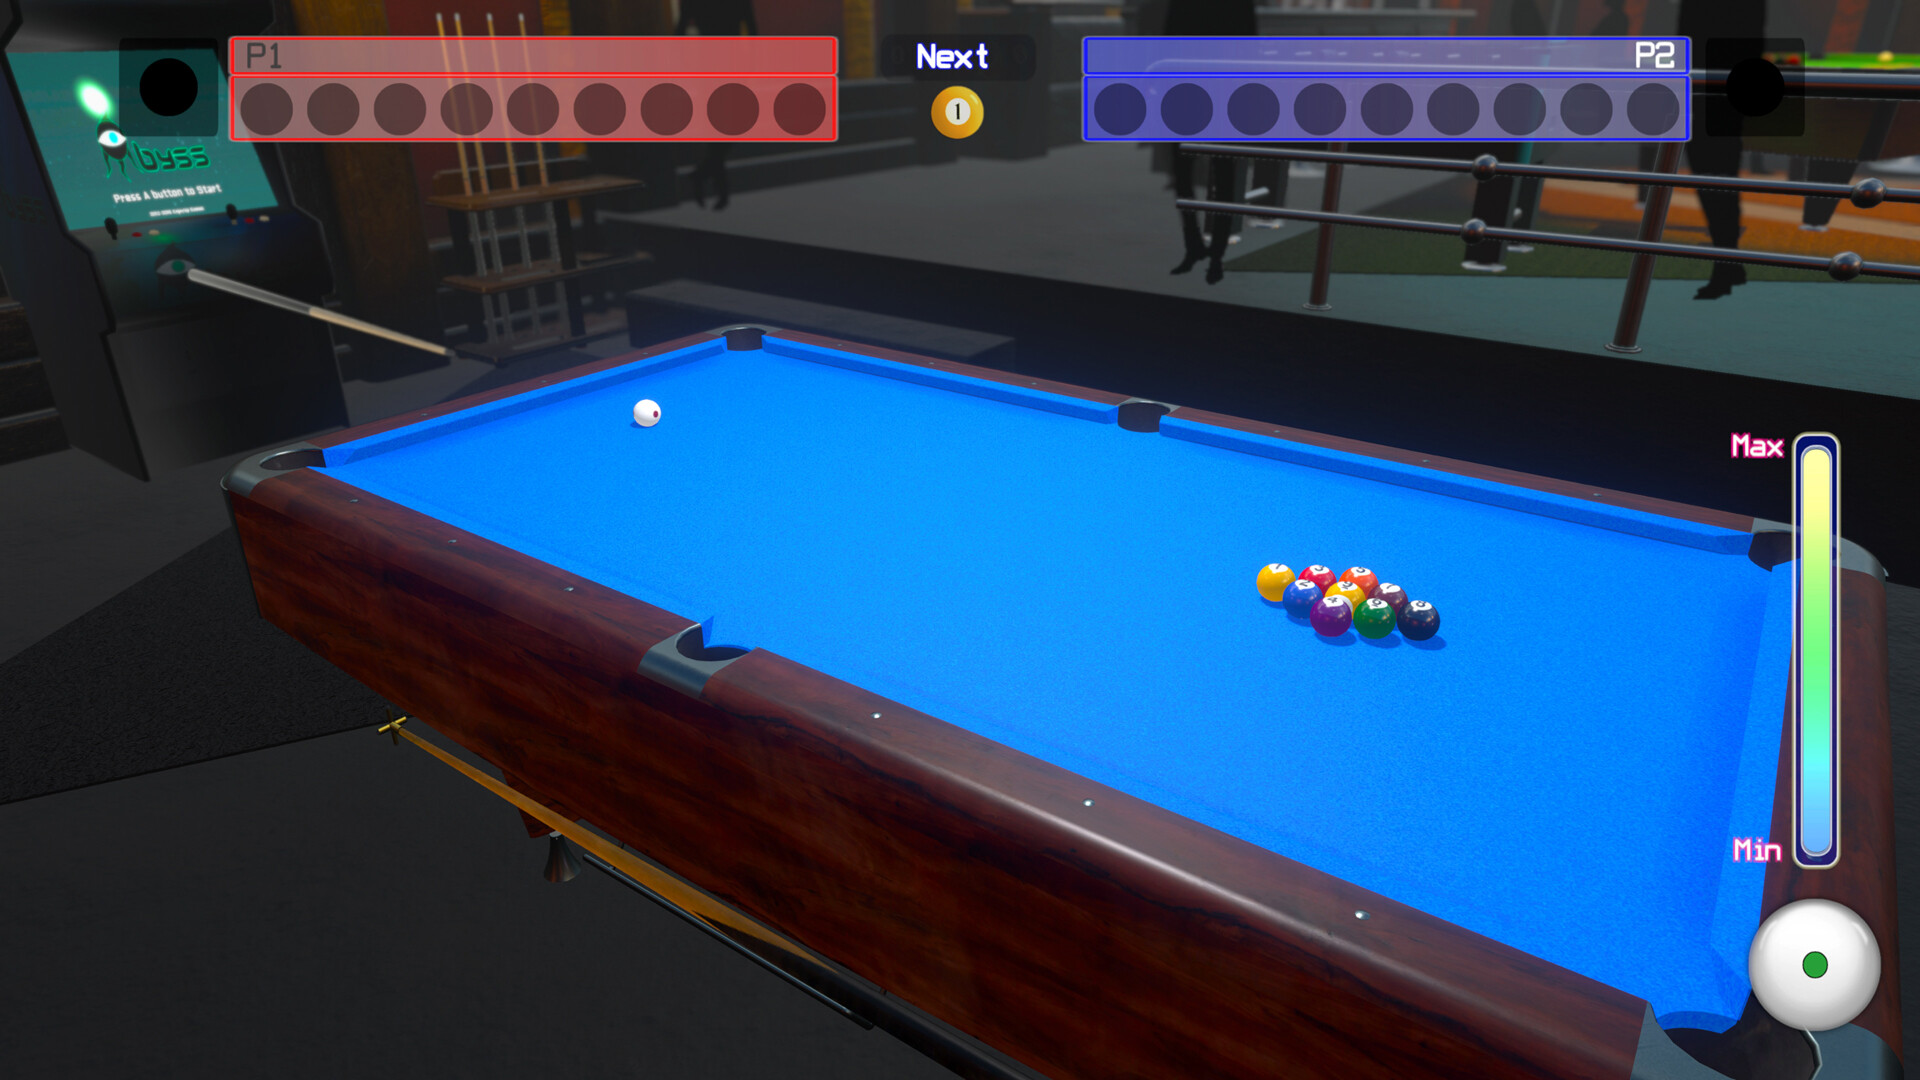 9-Ball Pocket⚡AUTODELIVERY Steam Russia